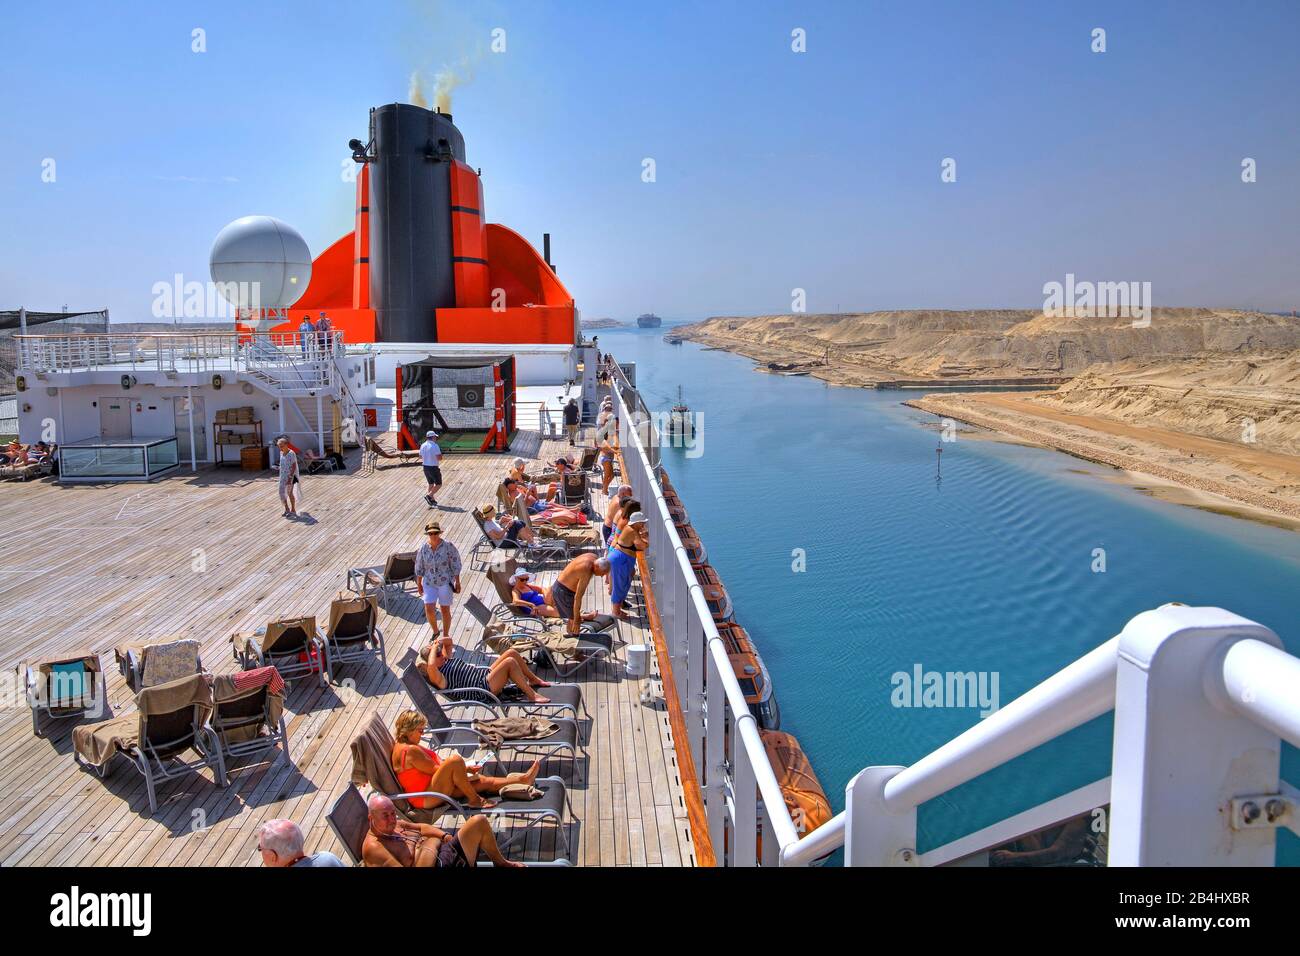 Upper deck with sun loungers and chimney of the transatlantic liner Queen Mary 2 in the Suez Canal (Suez Canal), Egypt Stock Photo